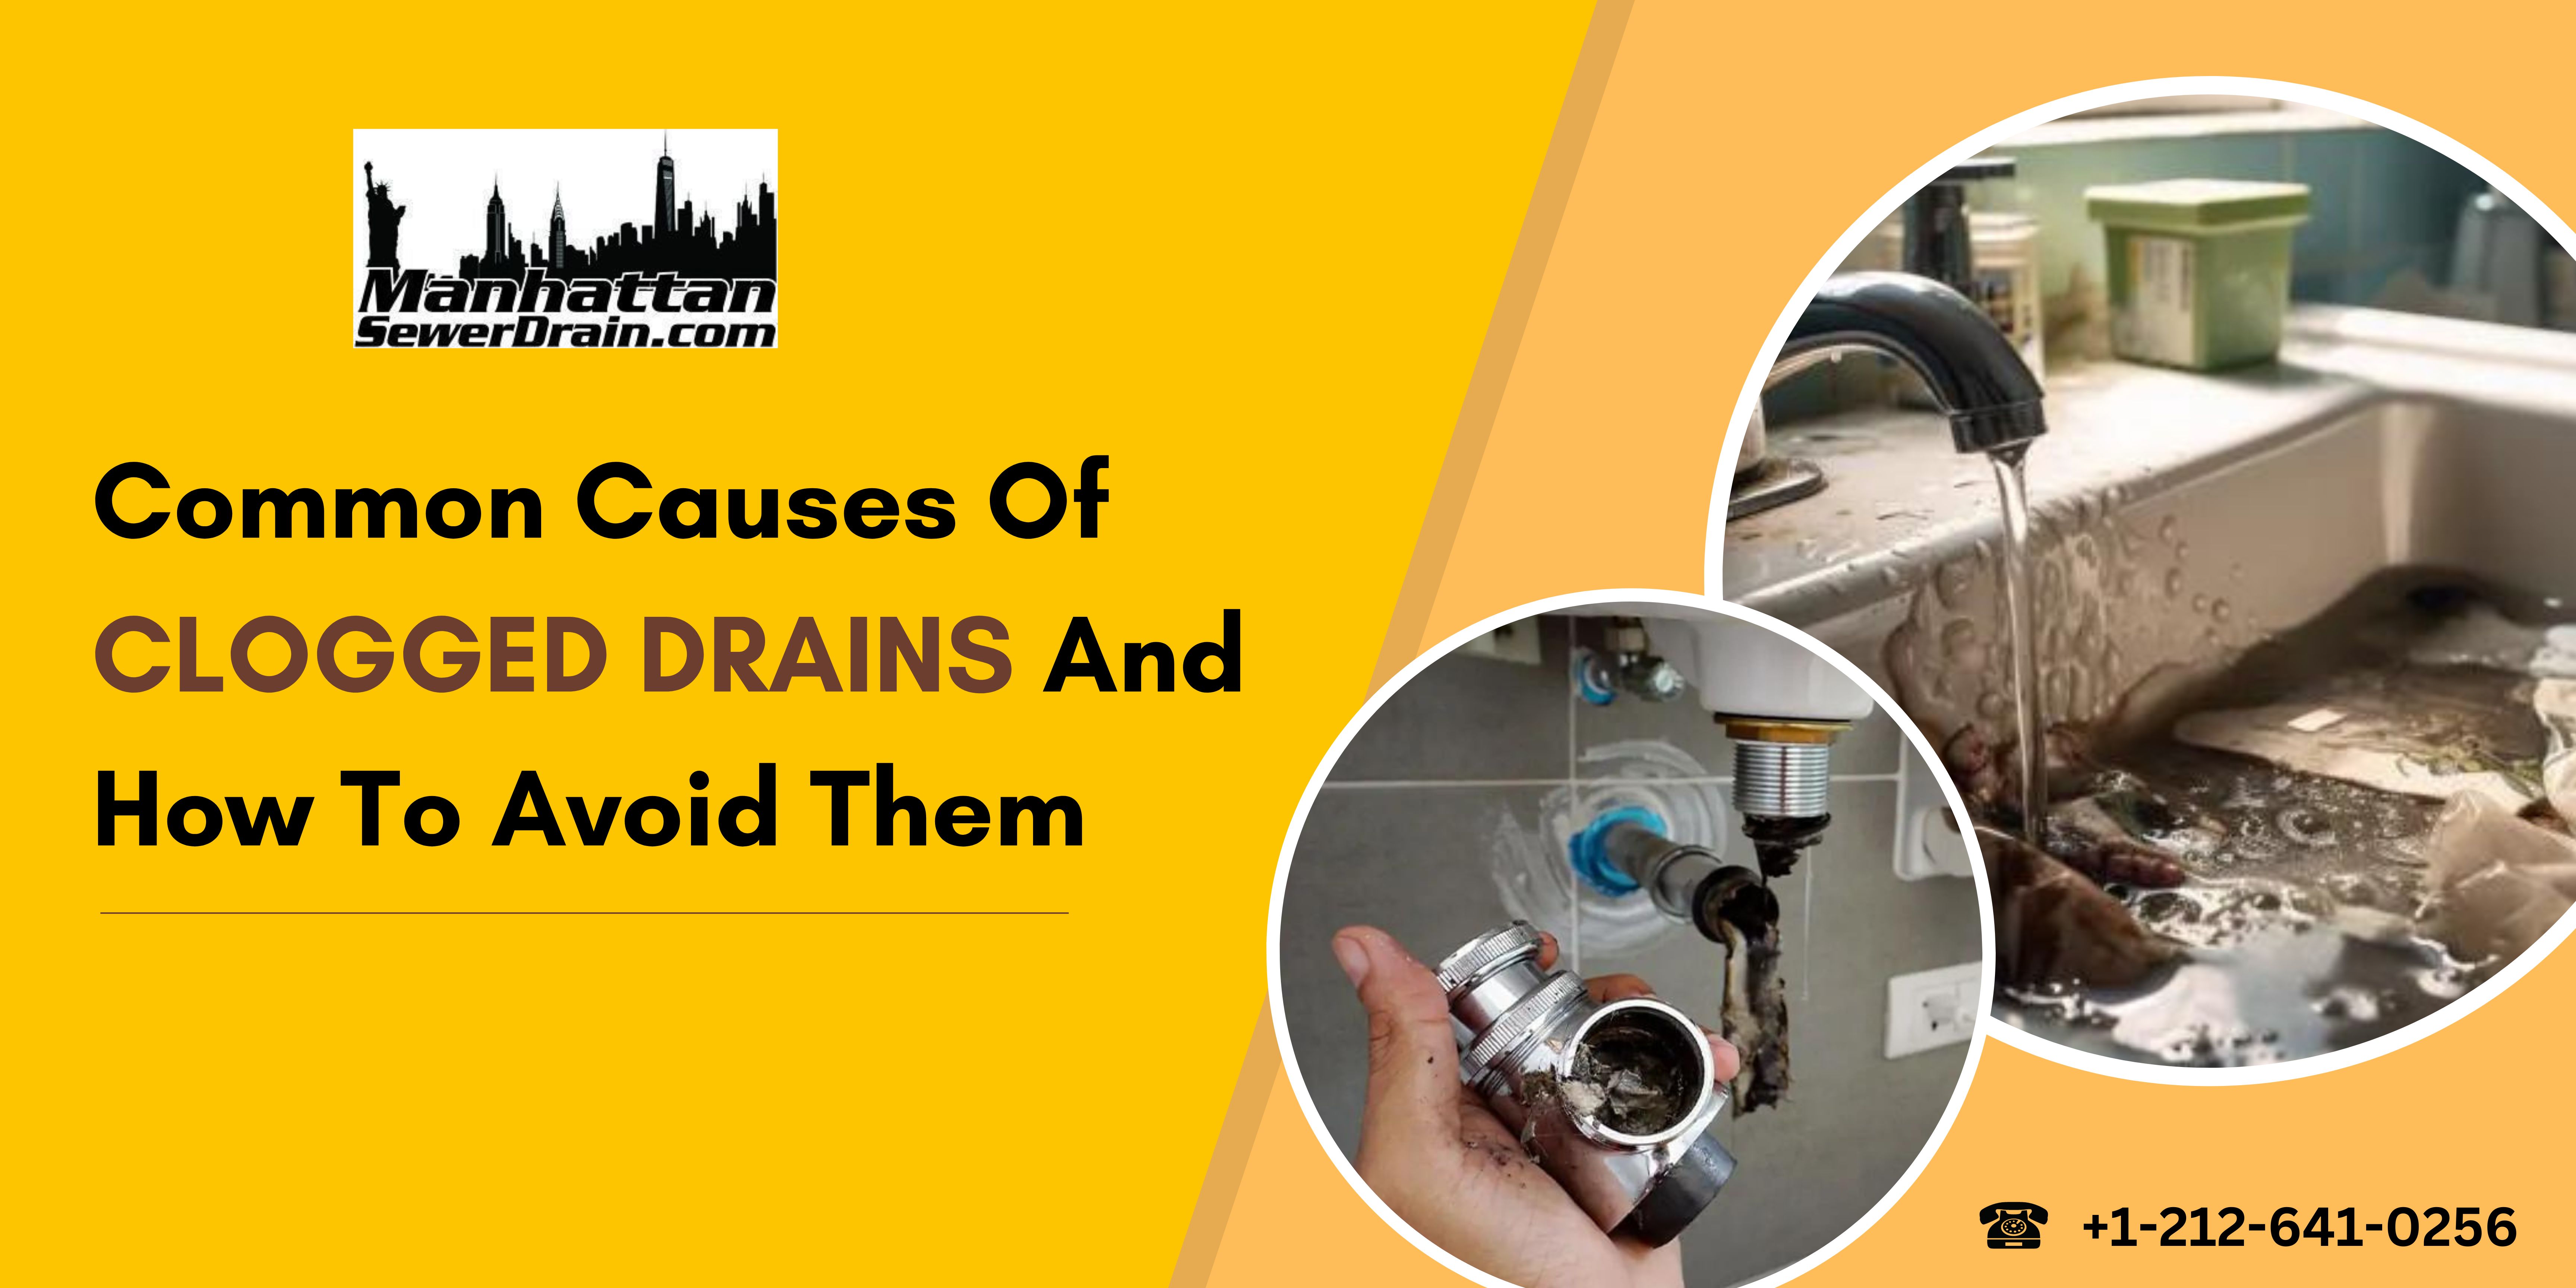 Common Causes Of Clogged Drains And How To Avoid Them